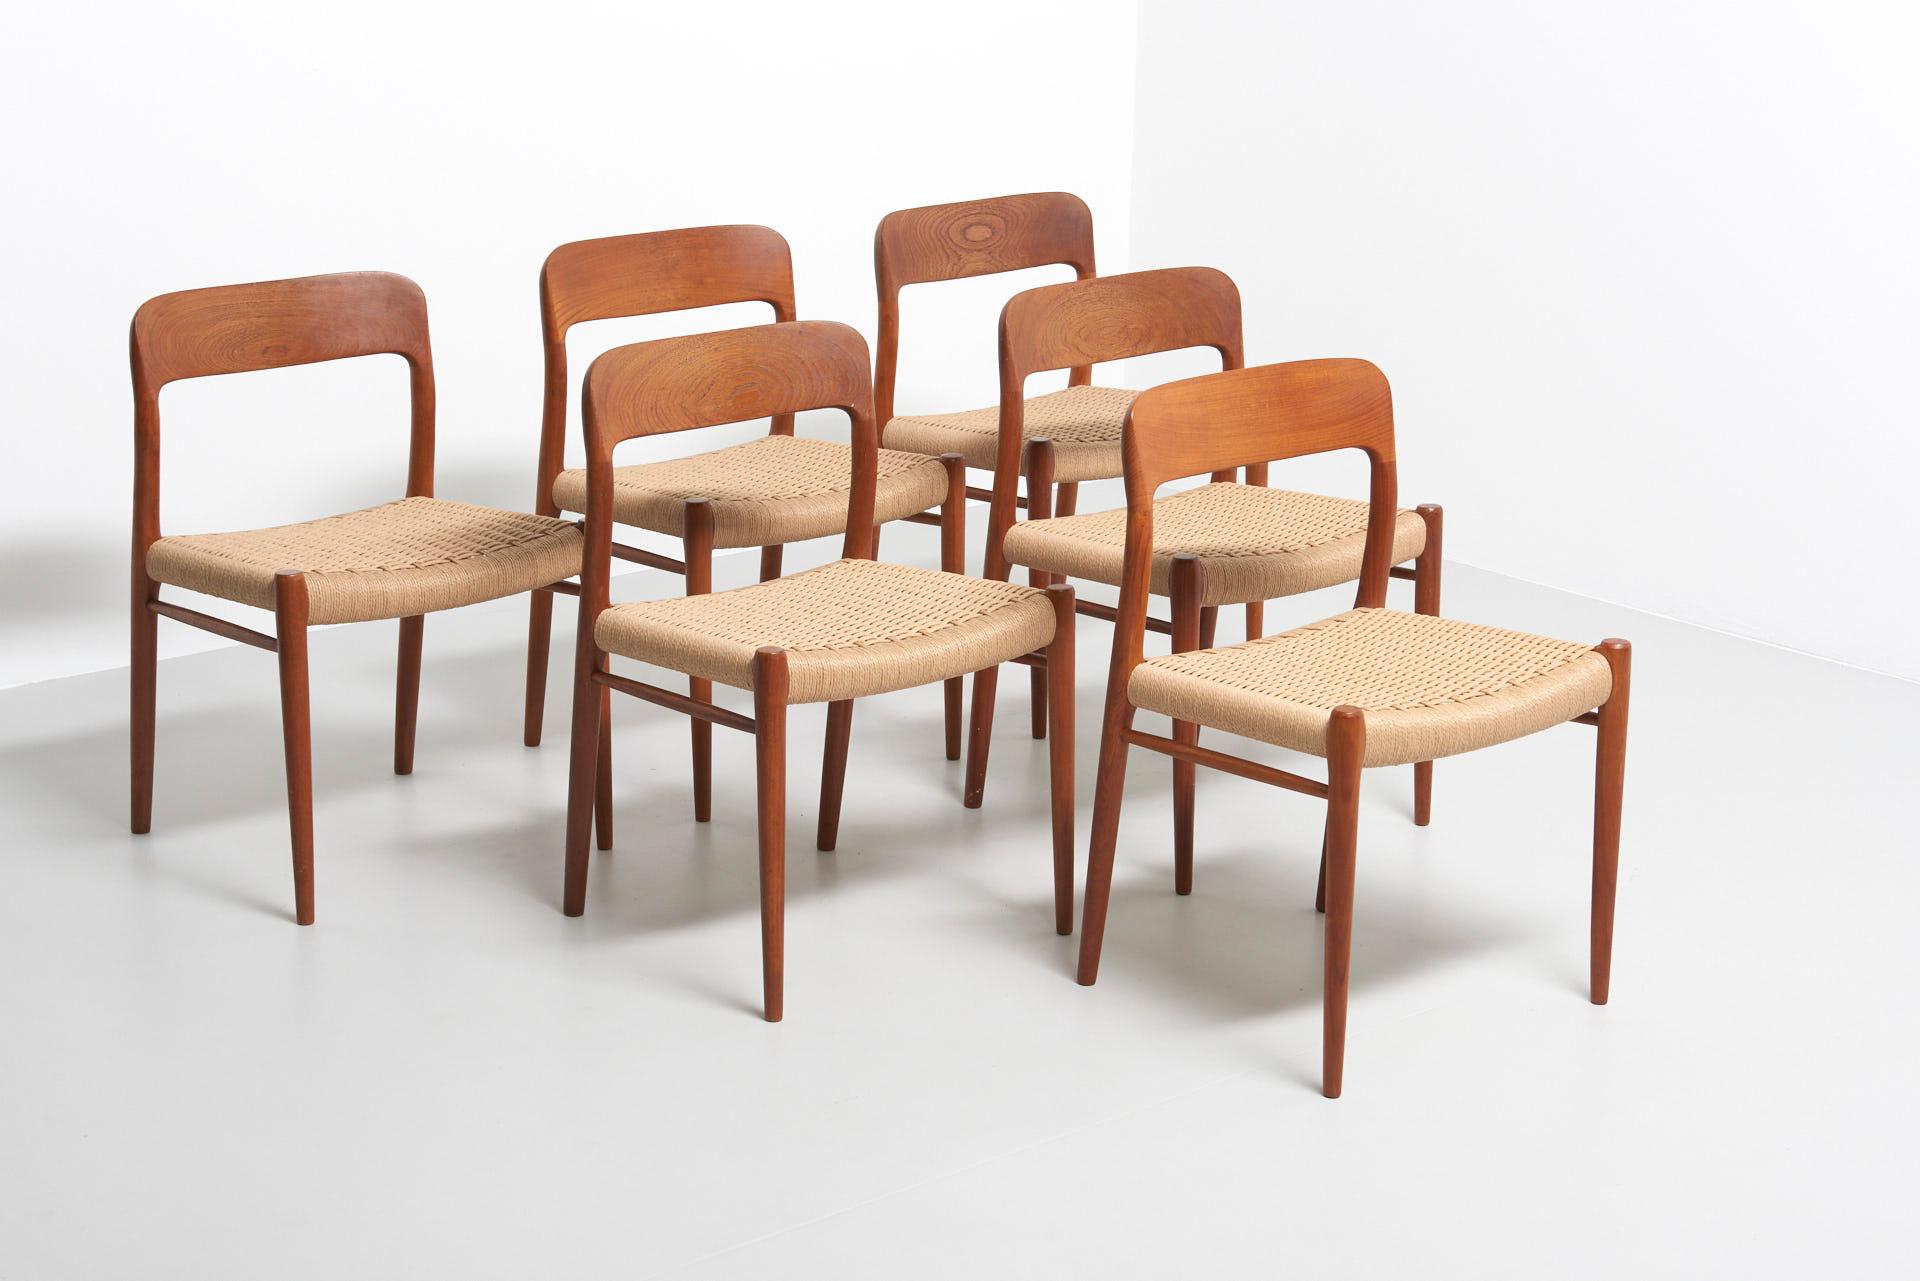 Set of 6 dining chairs in teak with carved backrests. Design by Niels O. Møller in 1954. Made by J.L. Møllers Møbelfabrik in Denmark. The set consists of 6 model 75 side chairs with new papercord seats.